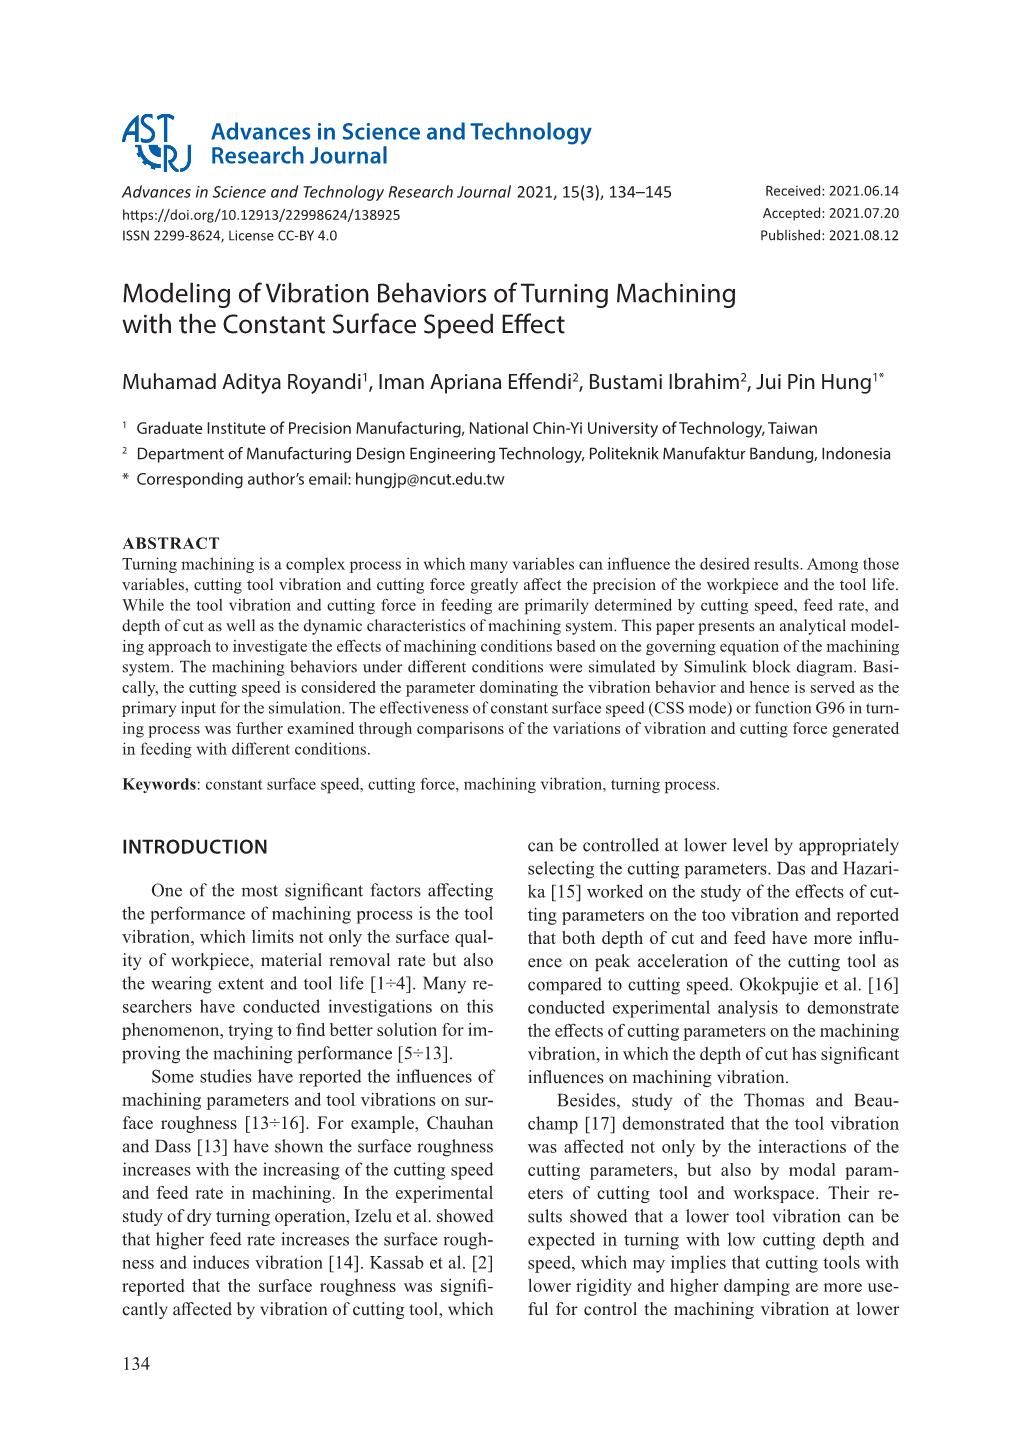 Modeling of Vibration Behaviors of Turning Machining with the Constant Surface Speed Effect